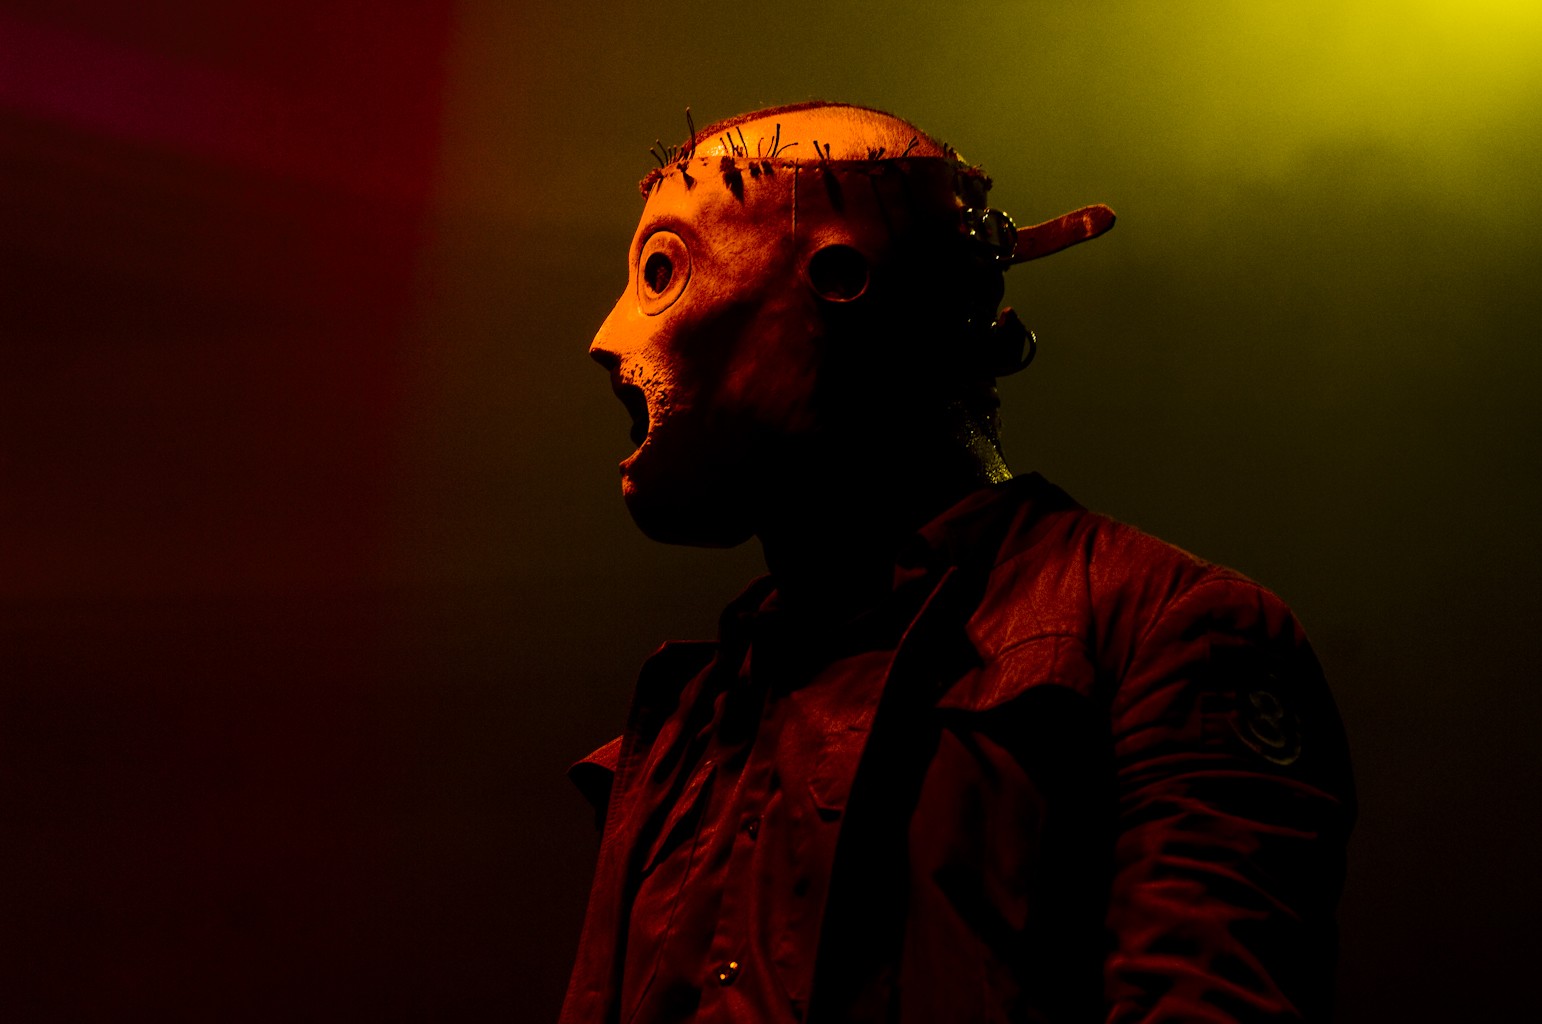 Slipknot Wallpapers HD scary